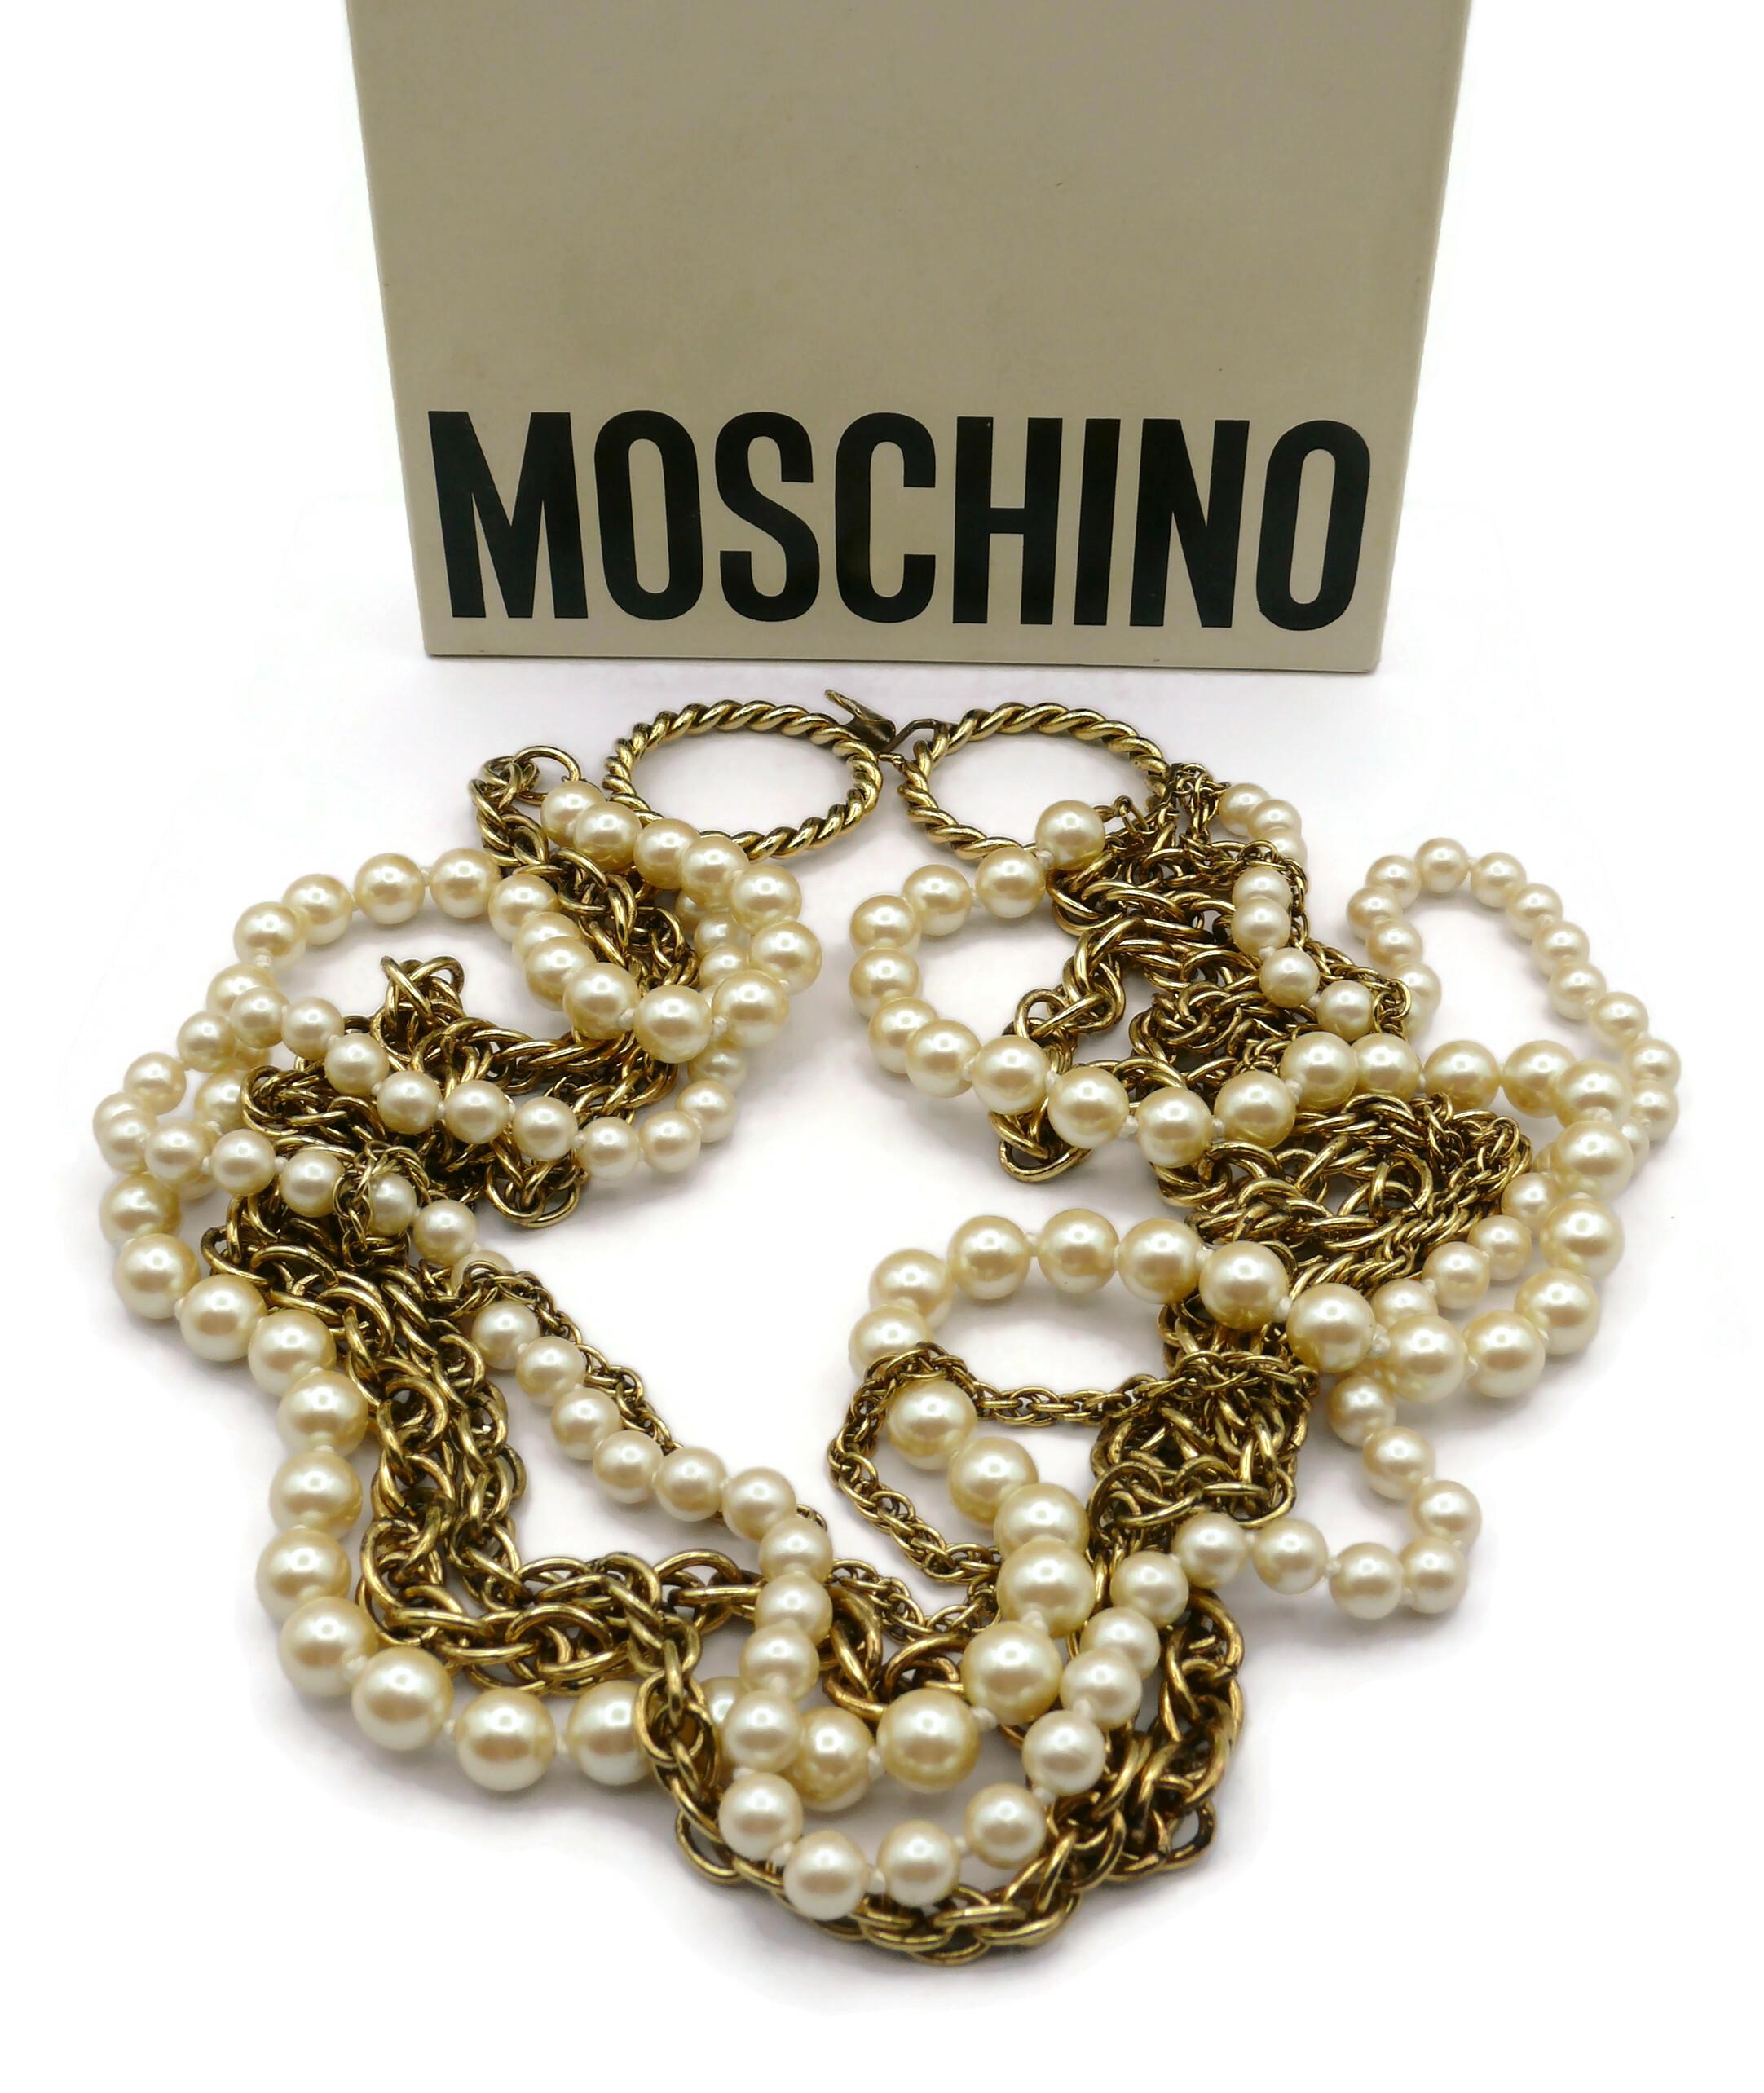 MOSCHINO vintage multi-strand gold tone chain and faux pearl necklace.

Hook clasp closure.

Embossed MOSCHINO.

Indicative measurement : length approx. 76 cm (29.92 inches).

Material : Gold tone metal hardware / Faux pearls.

Comes with the